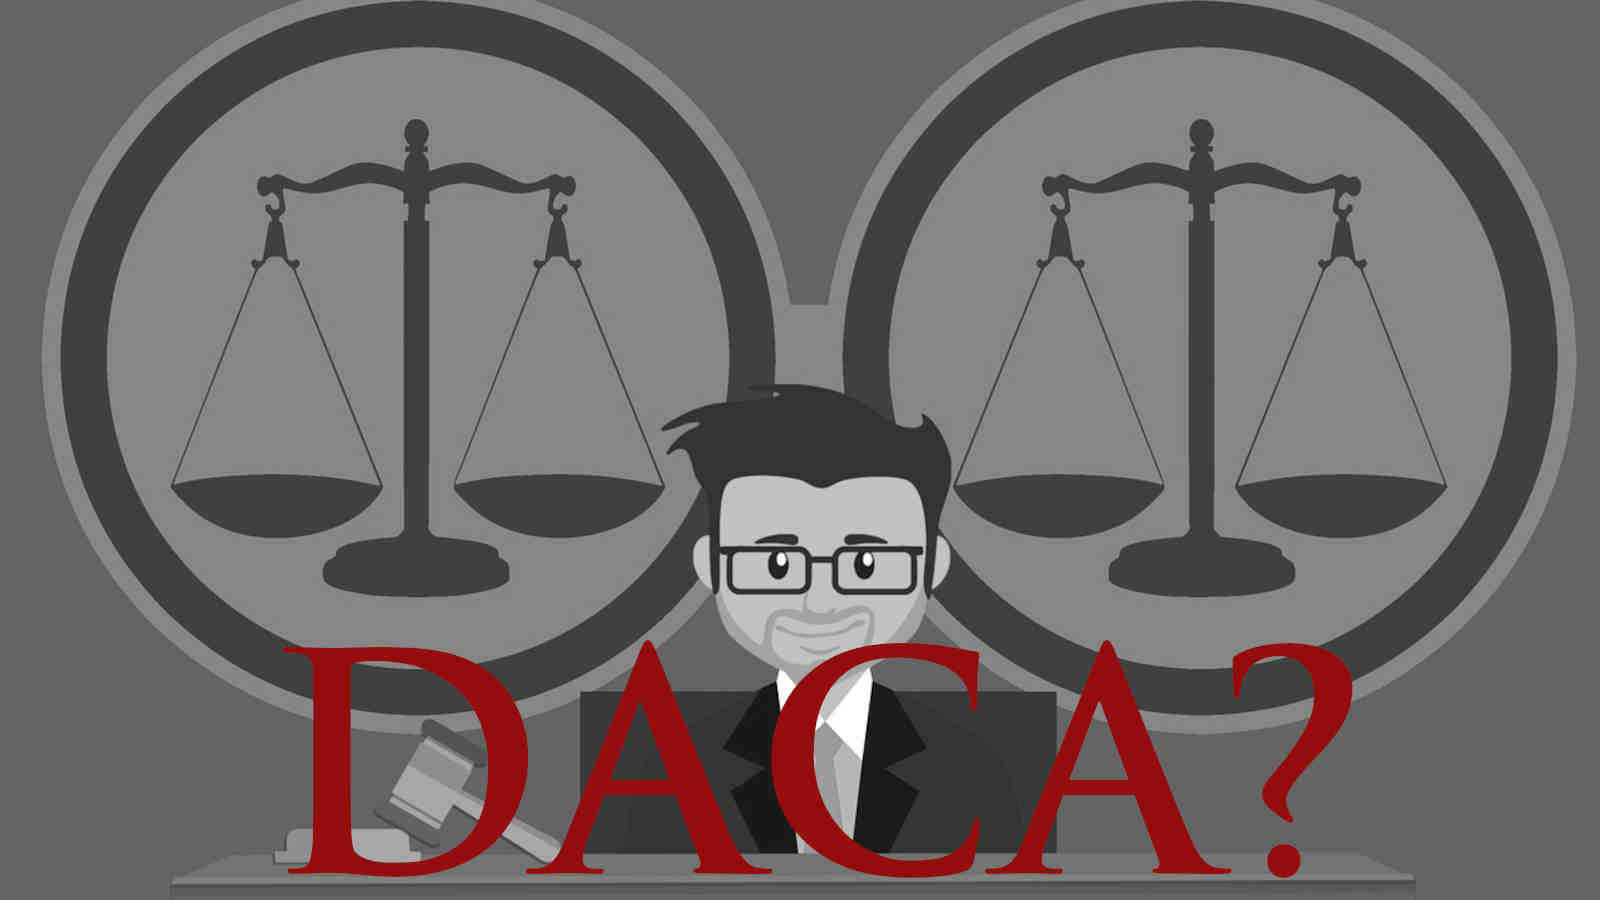 Can I Still Apply for DACA? Christians Law, PLLC